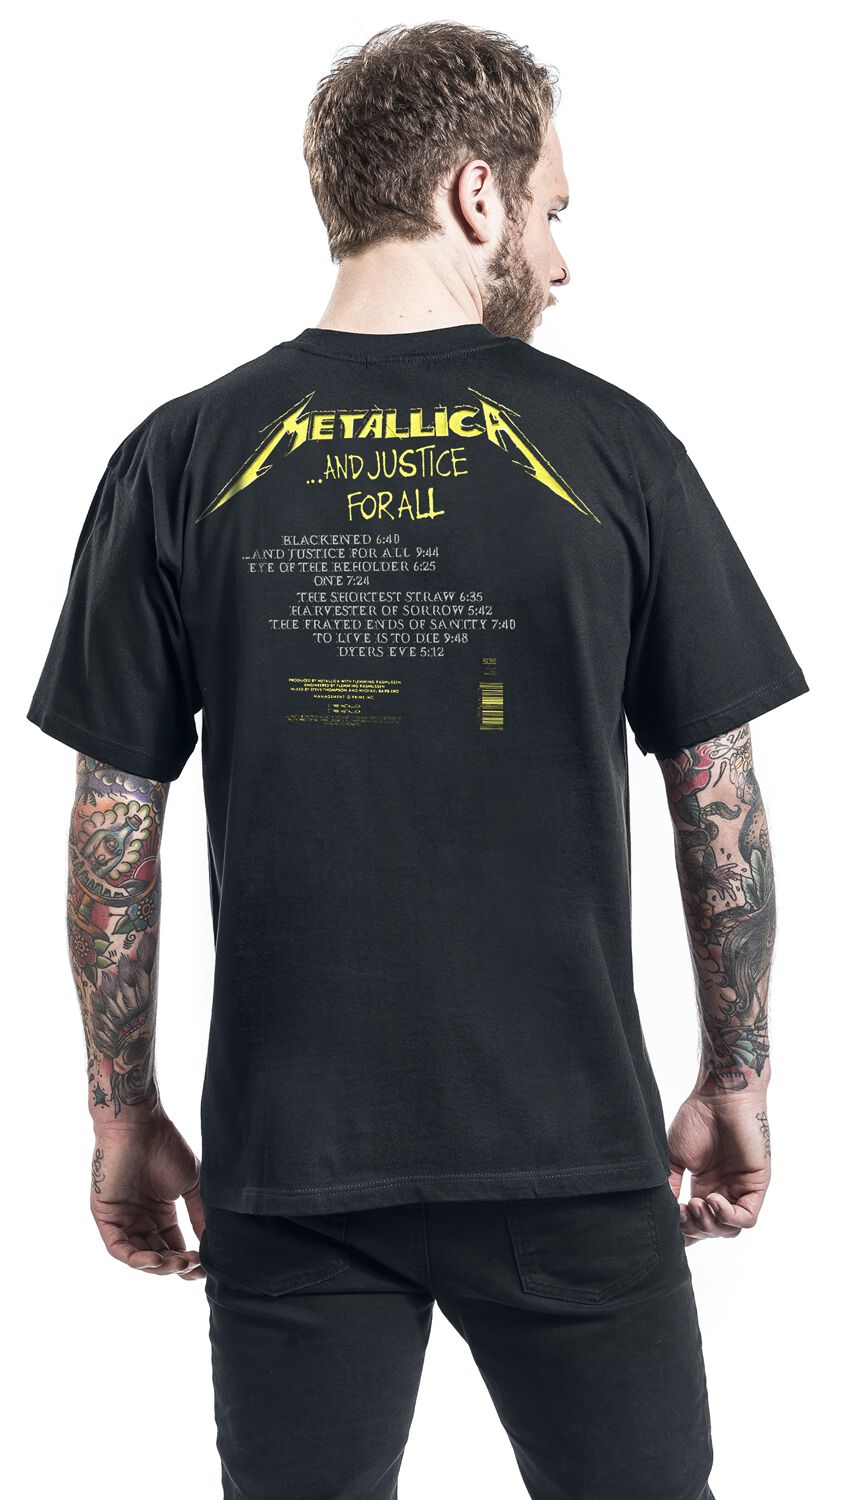 Metallica - And Justice for All Album Cover T-Shirt - Size Medium